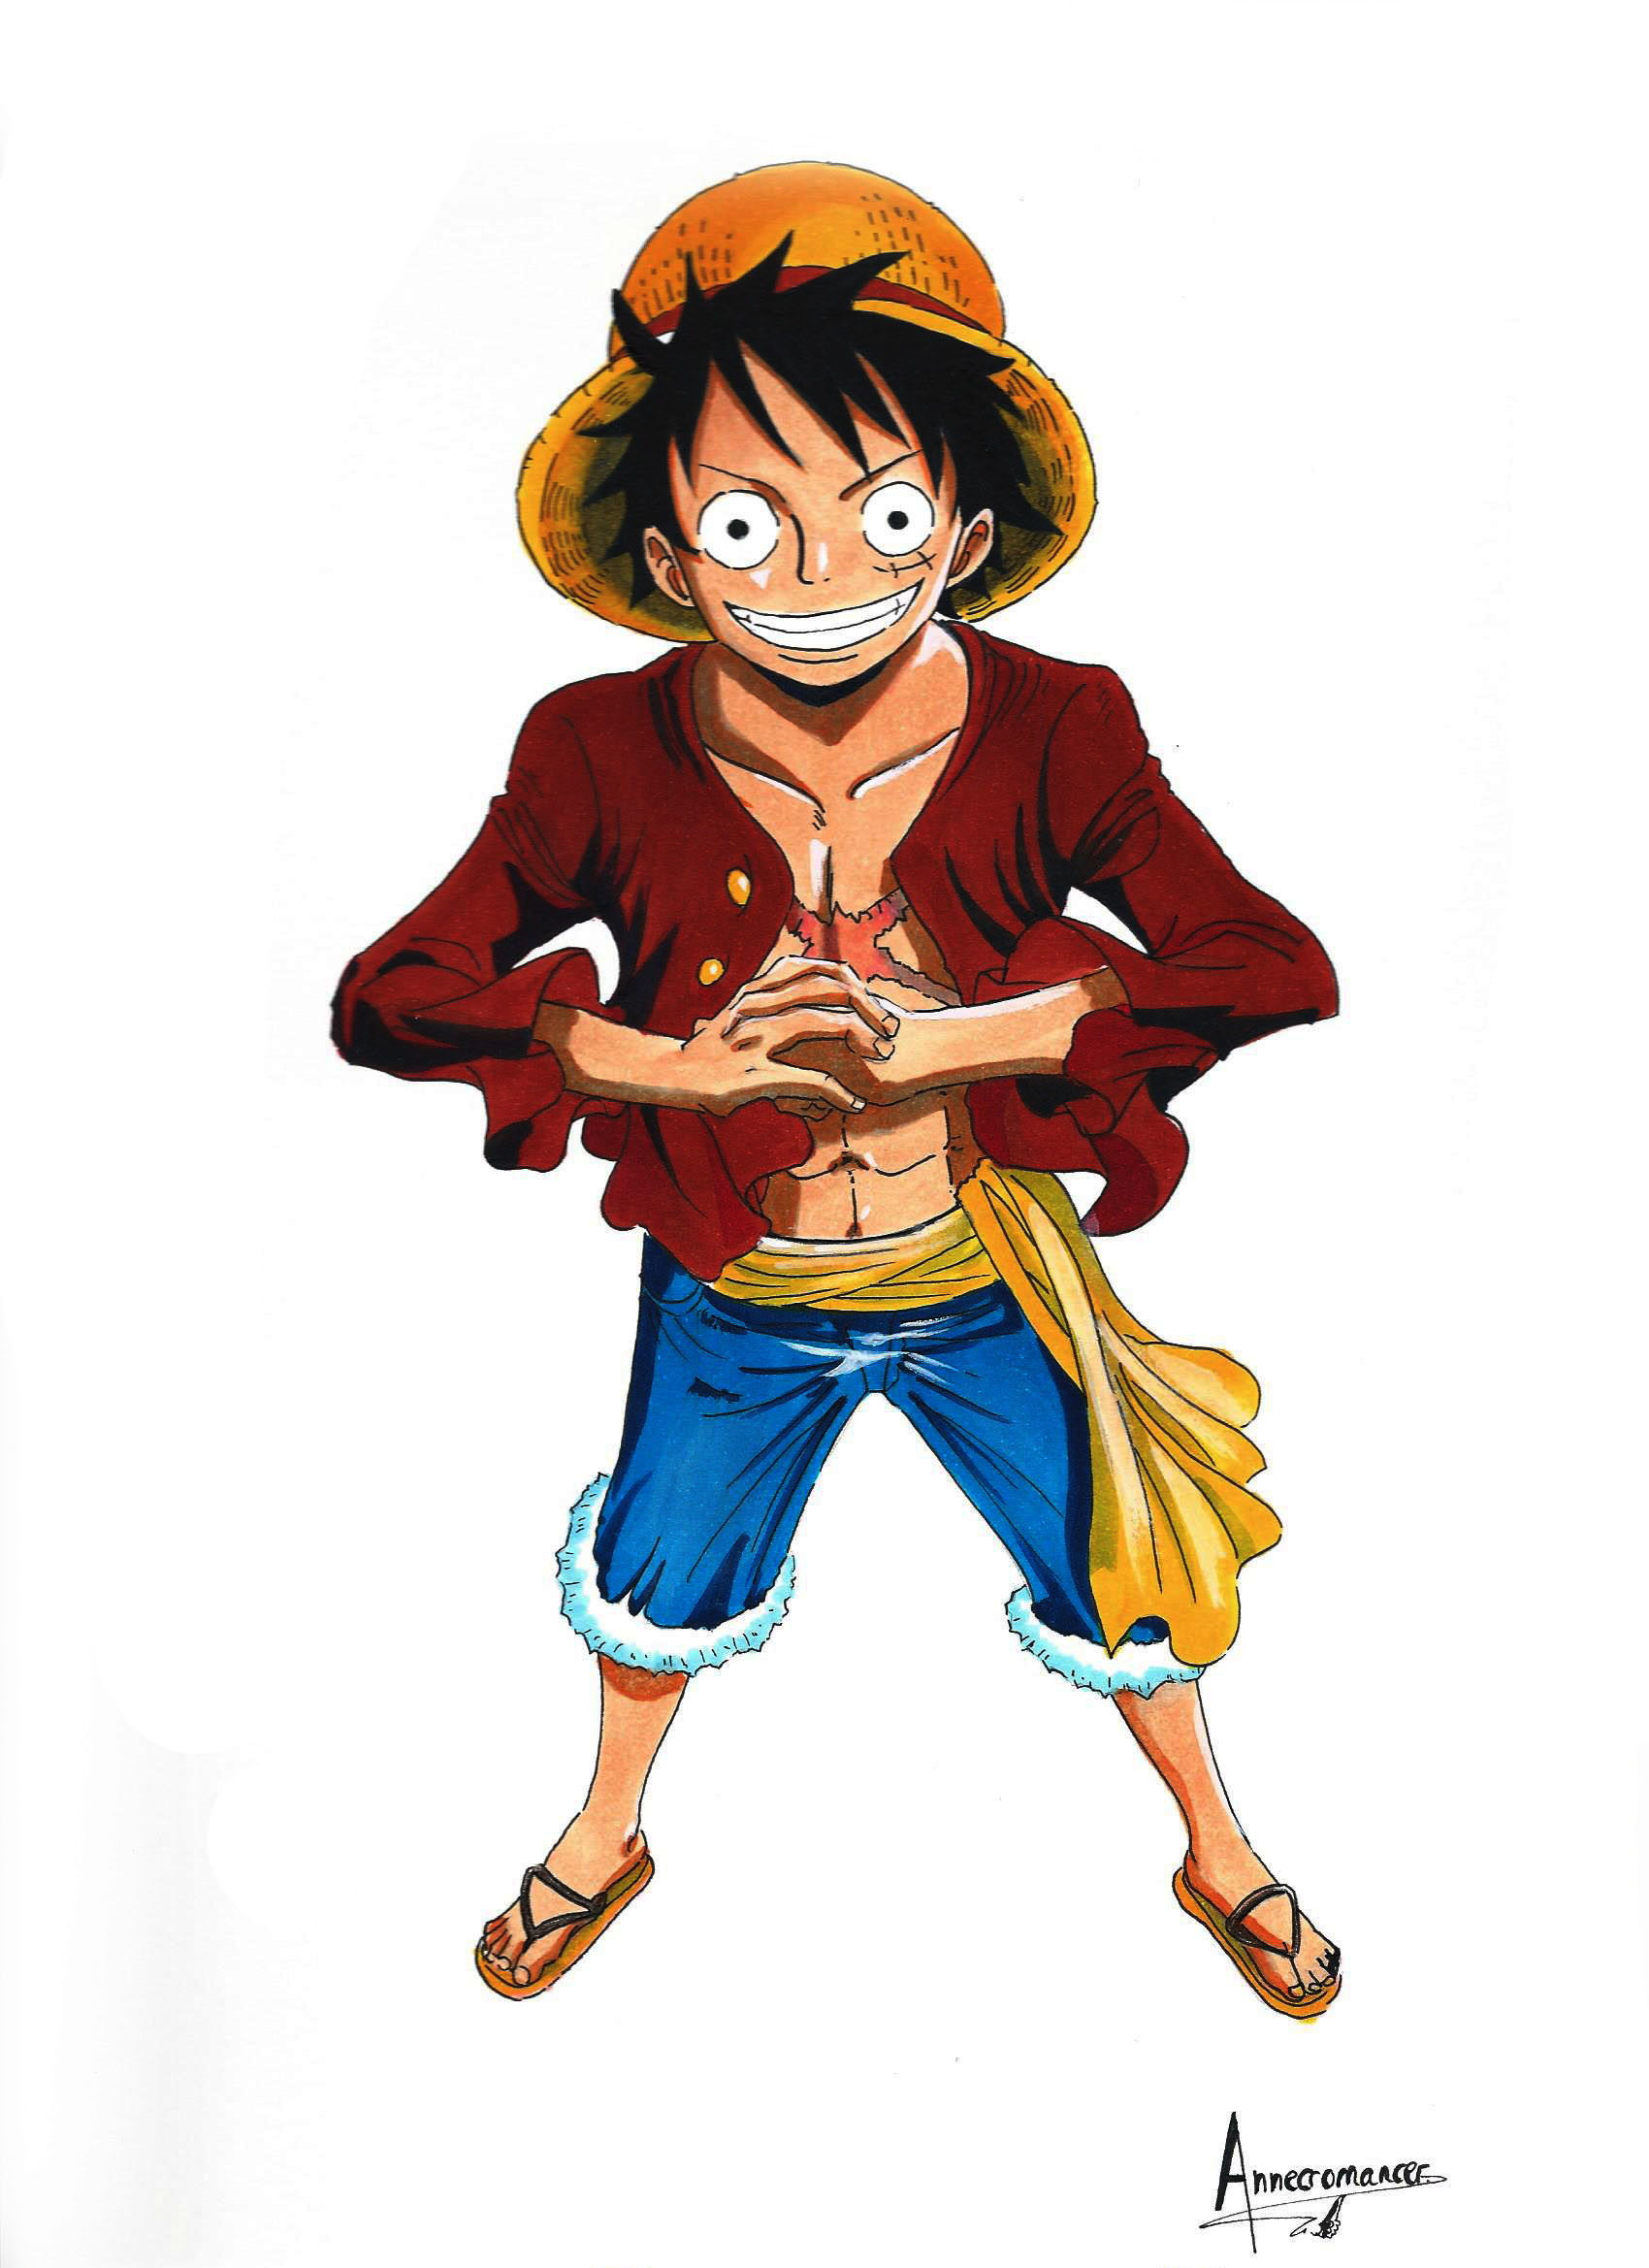 500x500 Luffy by Anonymee on DeviantArt